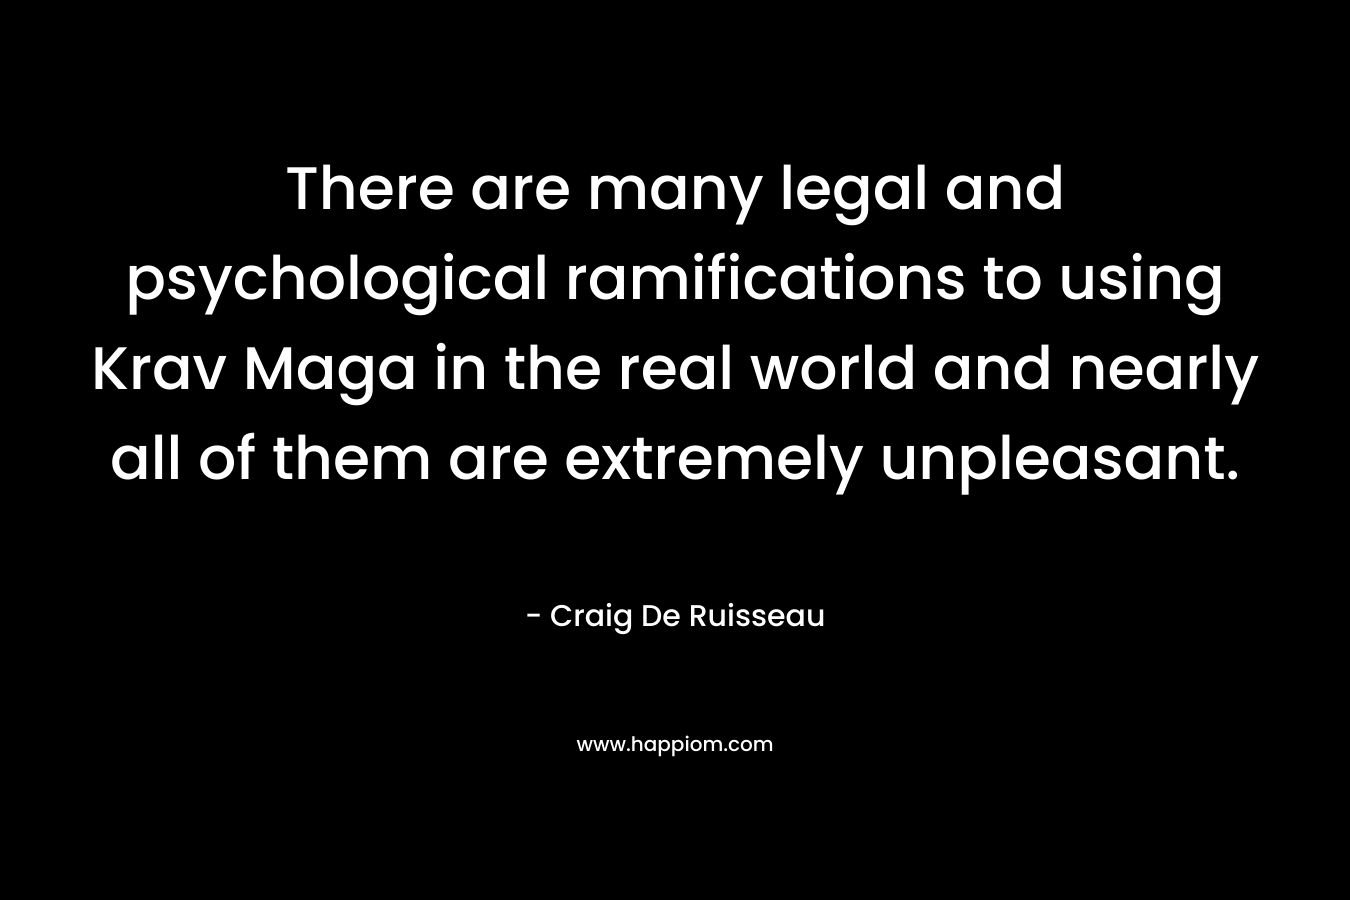 There are many legal and psychological ramifications to using Krav Maga in the real world and nearly all of them are extremely unpleasant. – Craig De Ruisseau